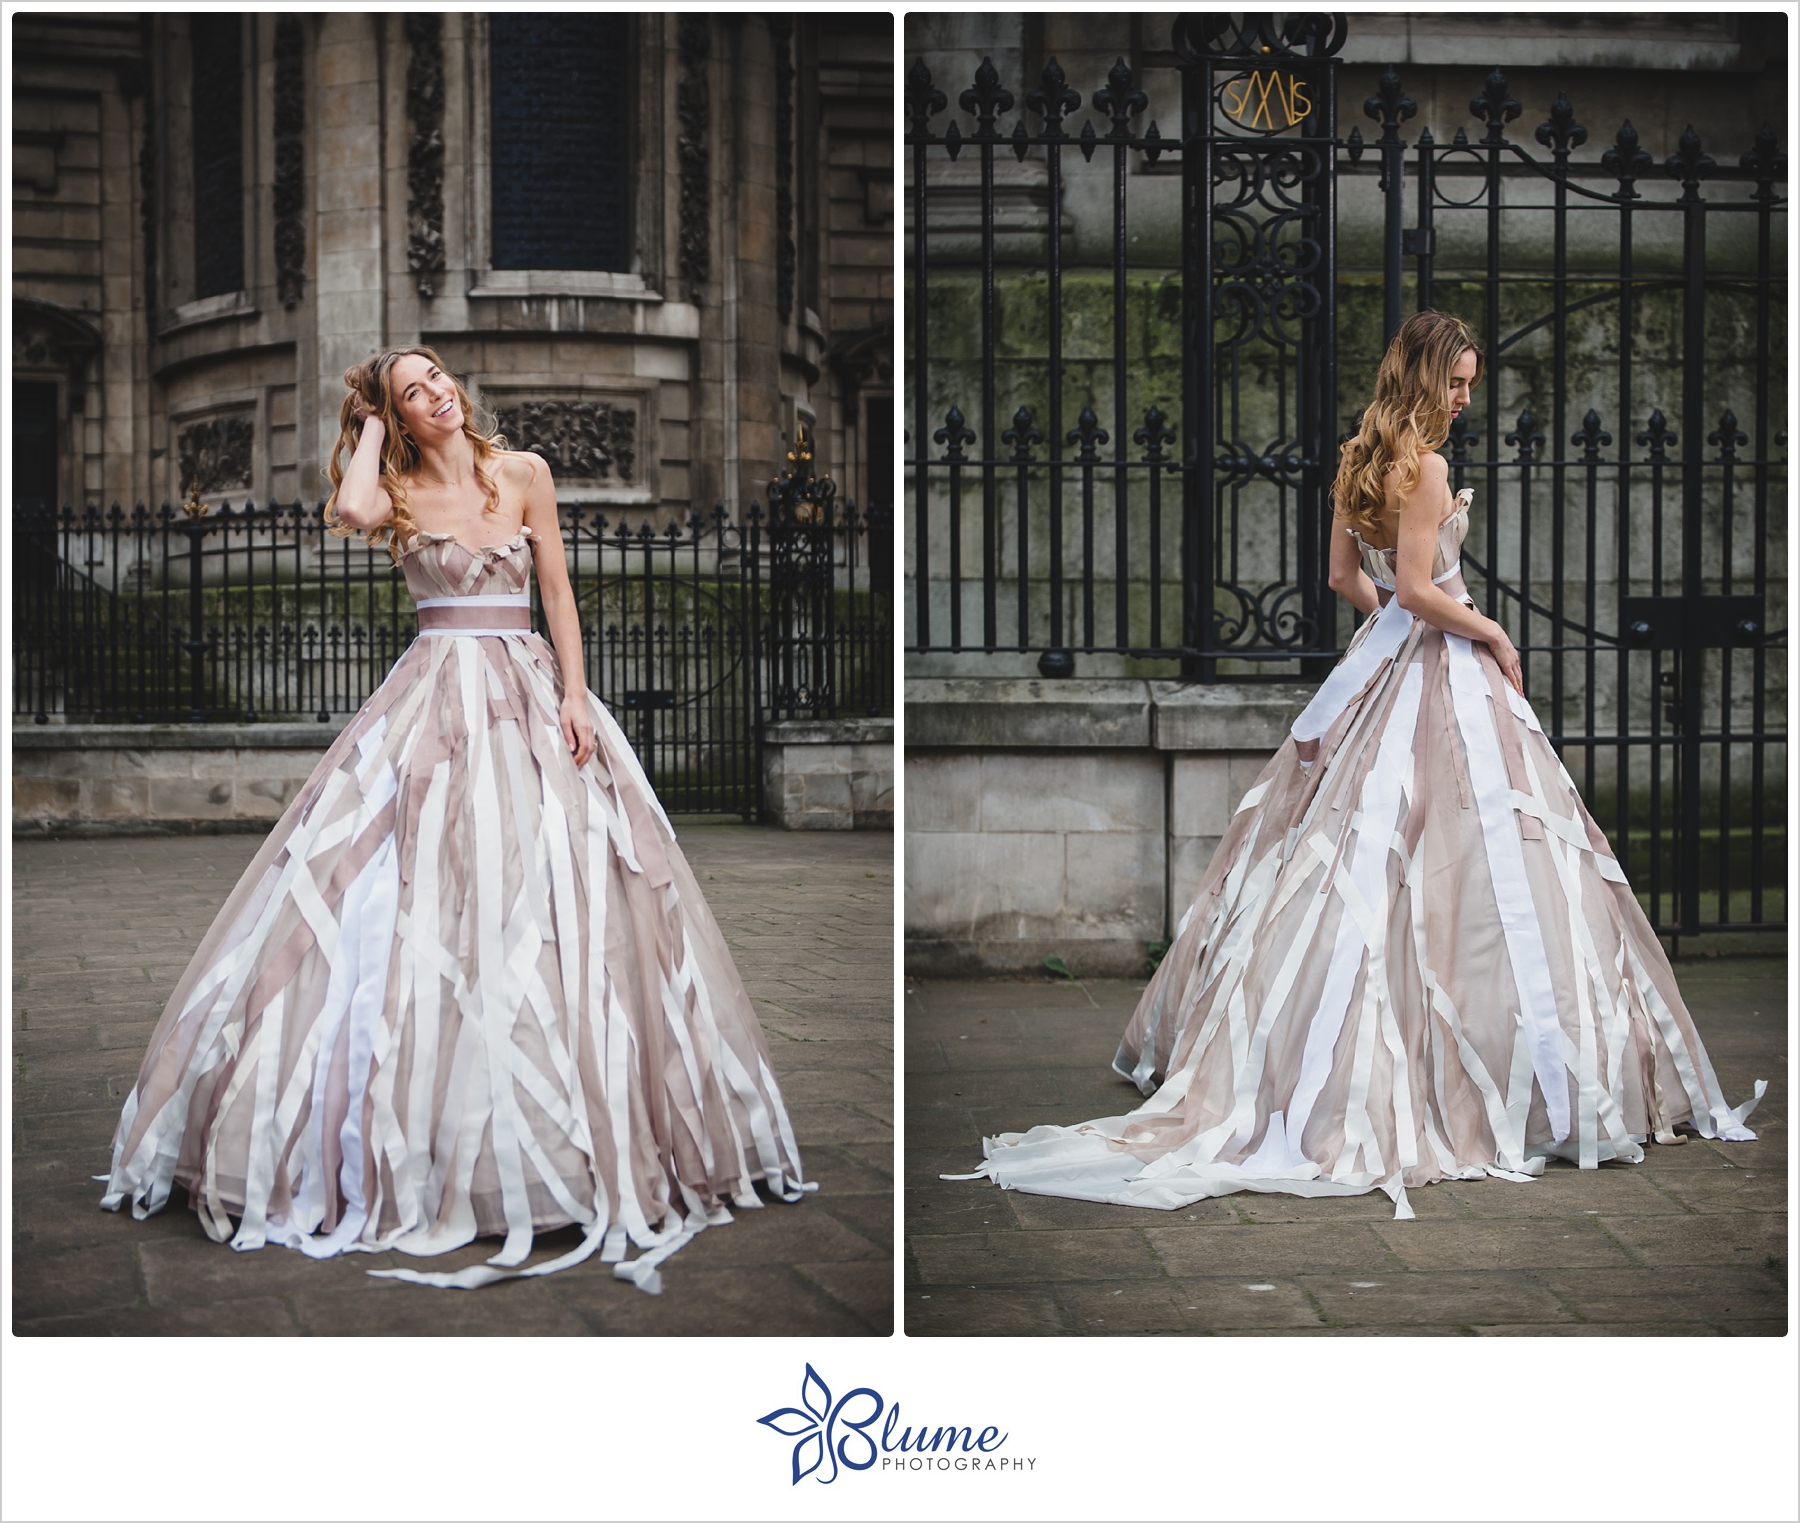 Alida Herbst,Britain,British,England,Europe,London,Somerset House,St. Paul's,UK,United Kingdom,cathedral,celebrity,courts of justice,designer,dresses,fashion,gowns,shoot,wedding,weddings,